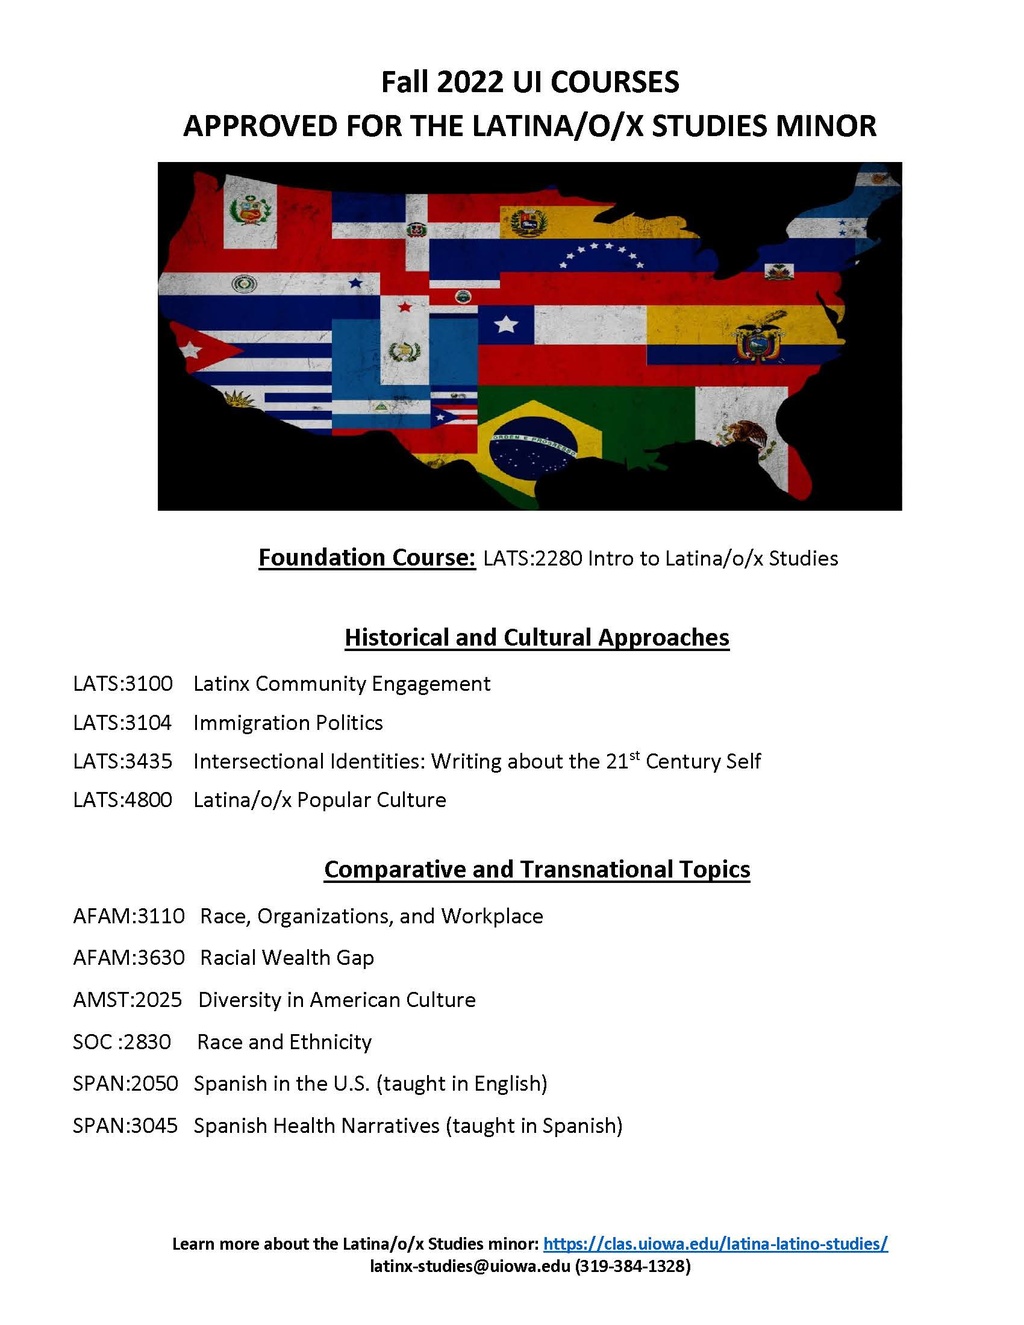 Updated list of fa22 courses approved for Latina/o/x minor with flags